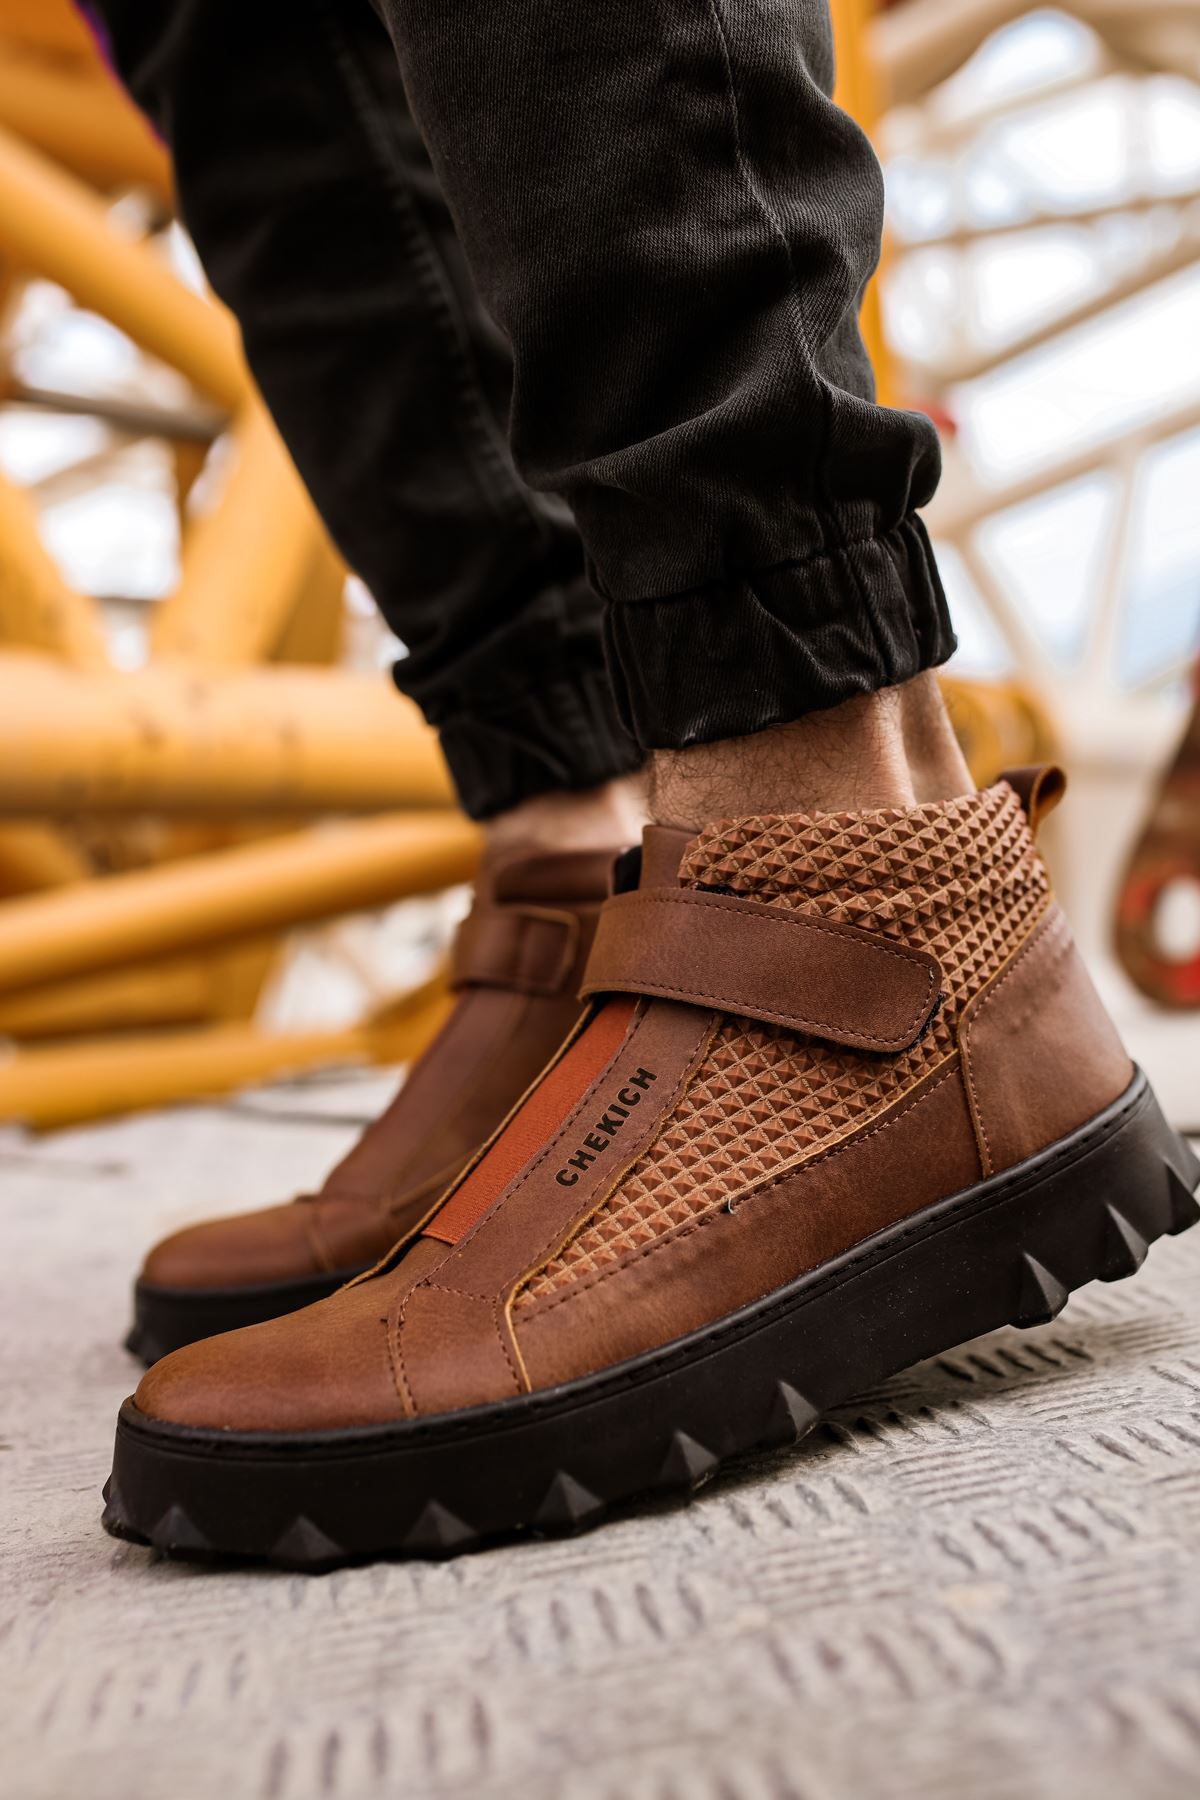 CH103 Men's Brown-Black Sole Casual Sneaker Boots - STREETMODE ™